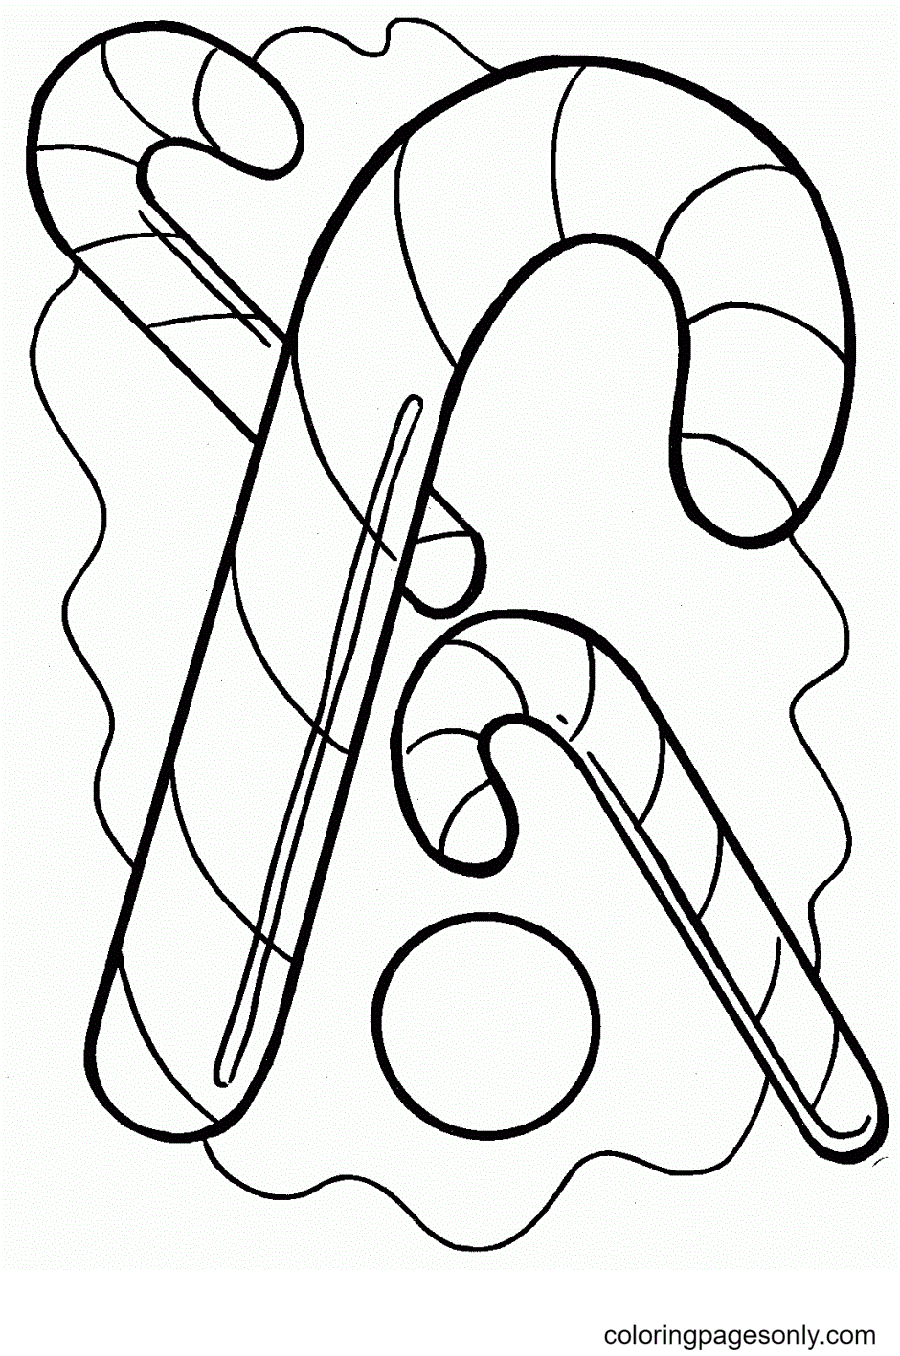 Free Christmas Candy Canes Coloring Page